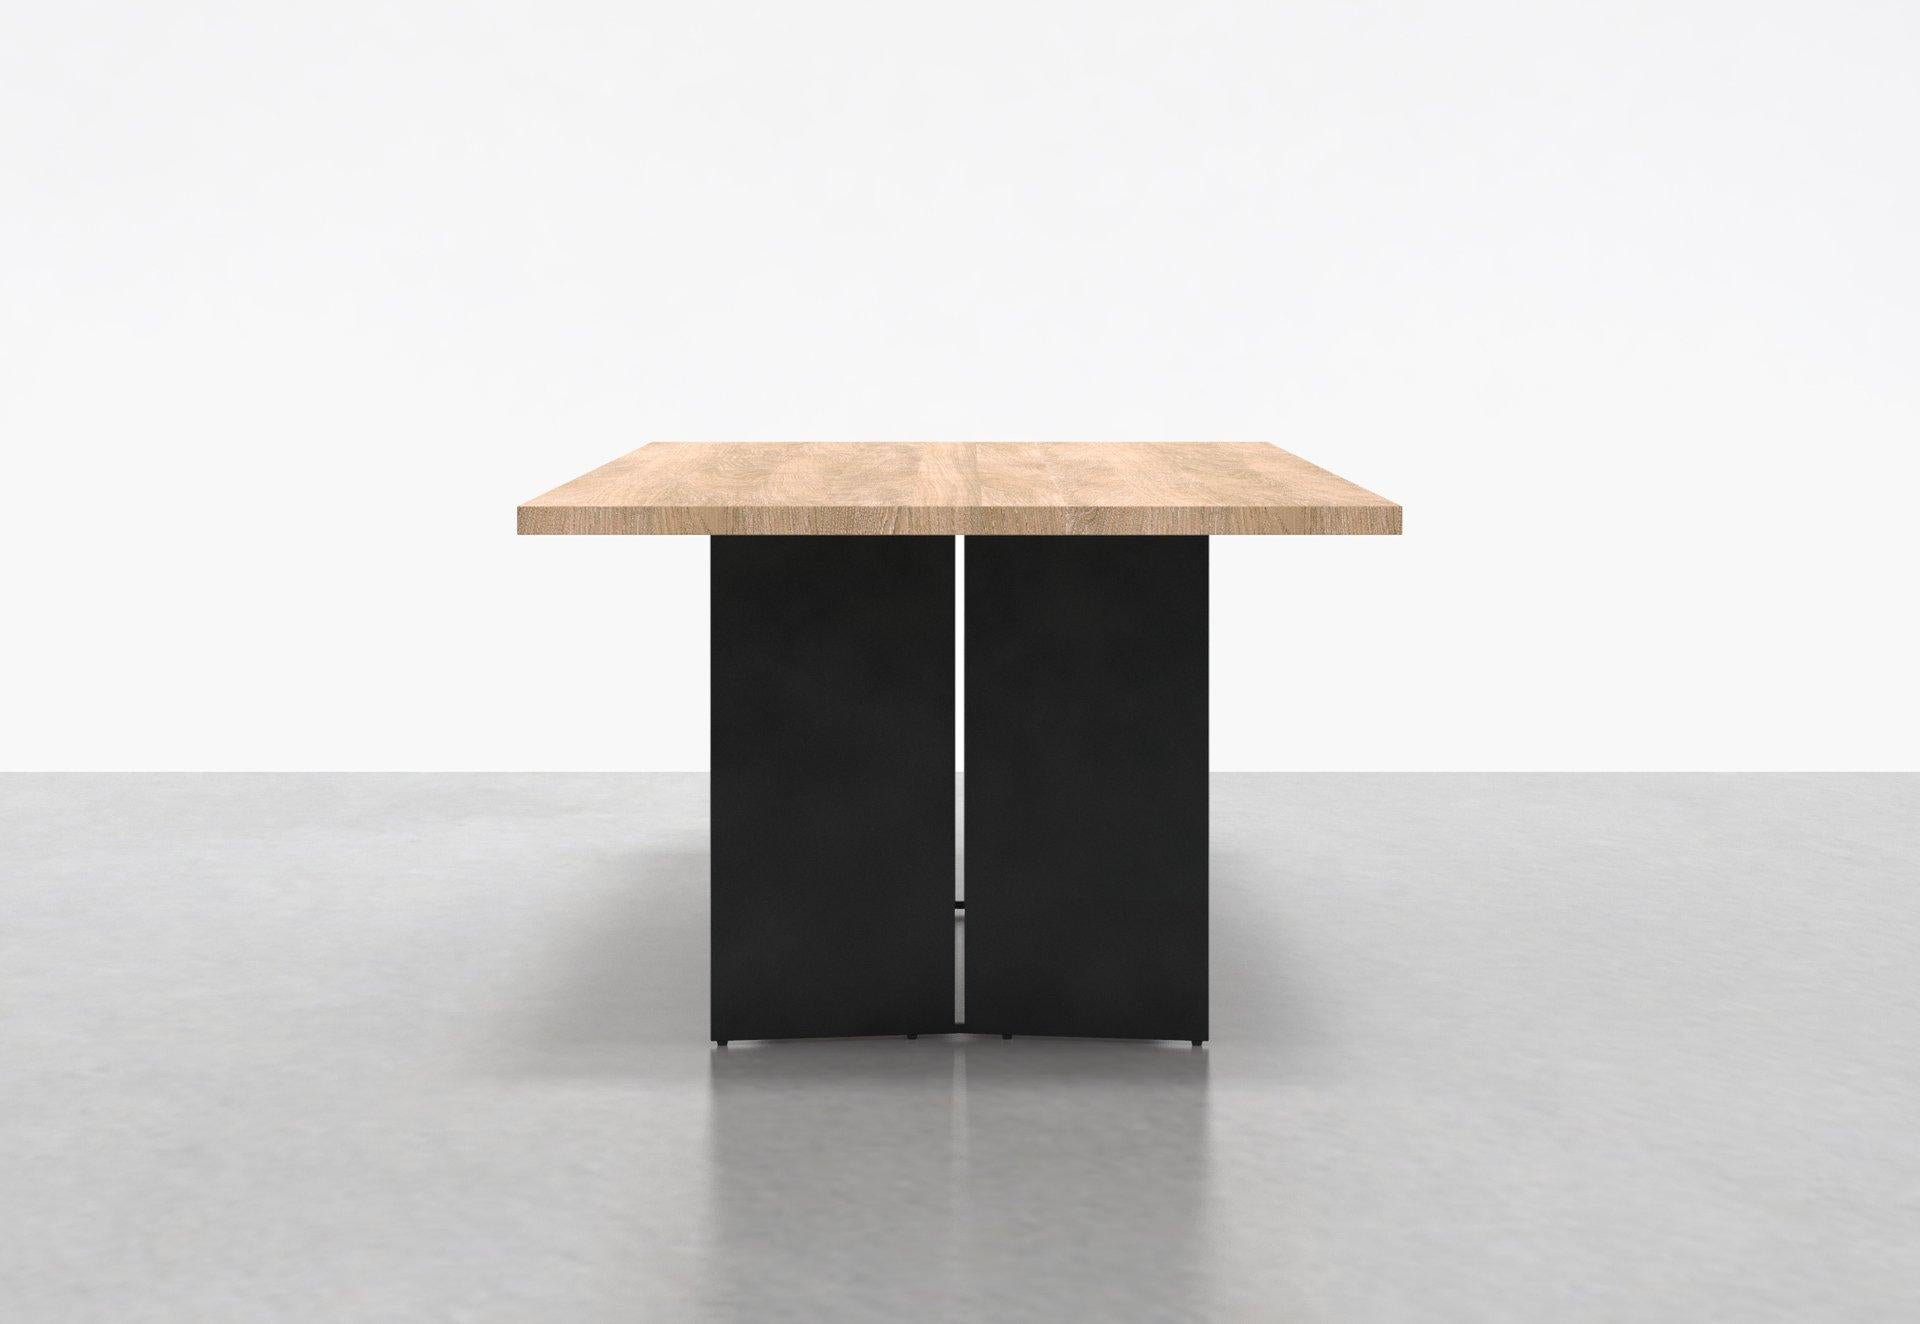 Two angled steel plates stand side by side on each end of our Milo Table, creating a clean contemporary form with ample clearance for legs and feet. The solid wood surface sits elegantly atop the base, creating a true sculptural element in any